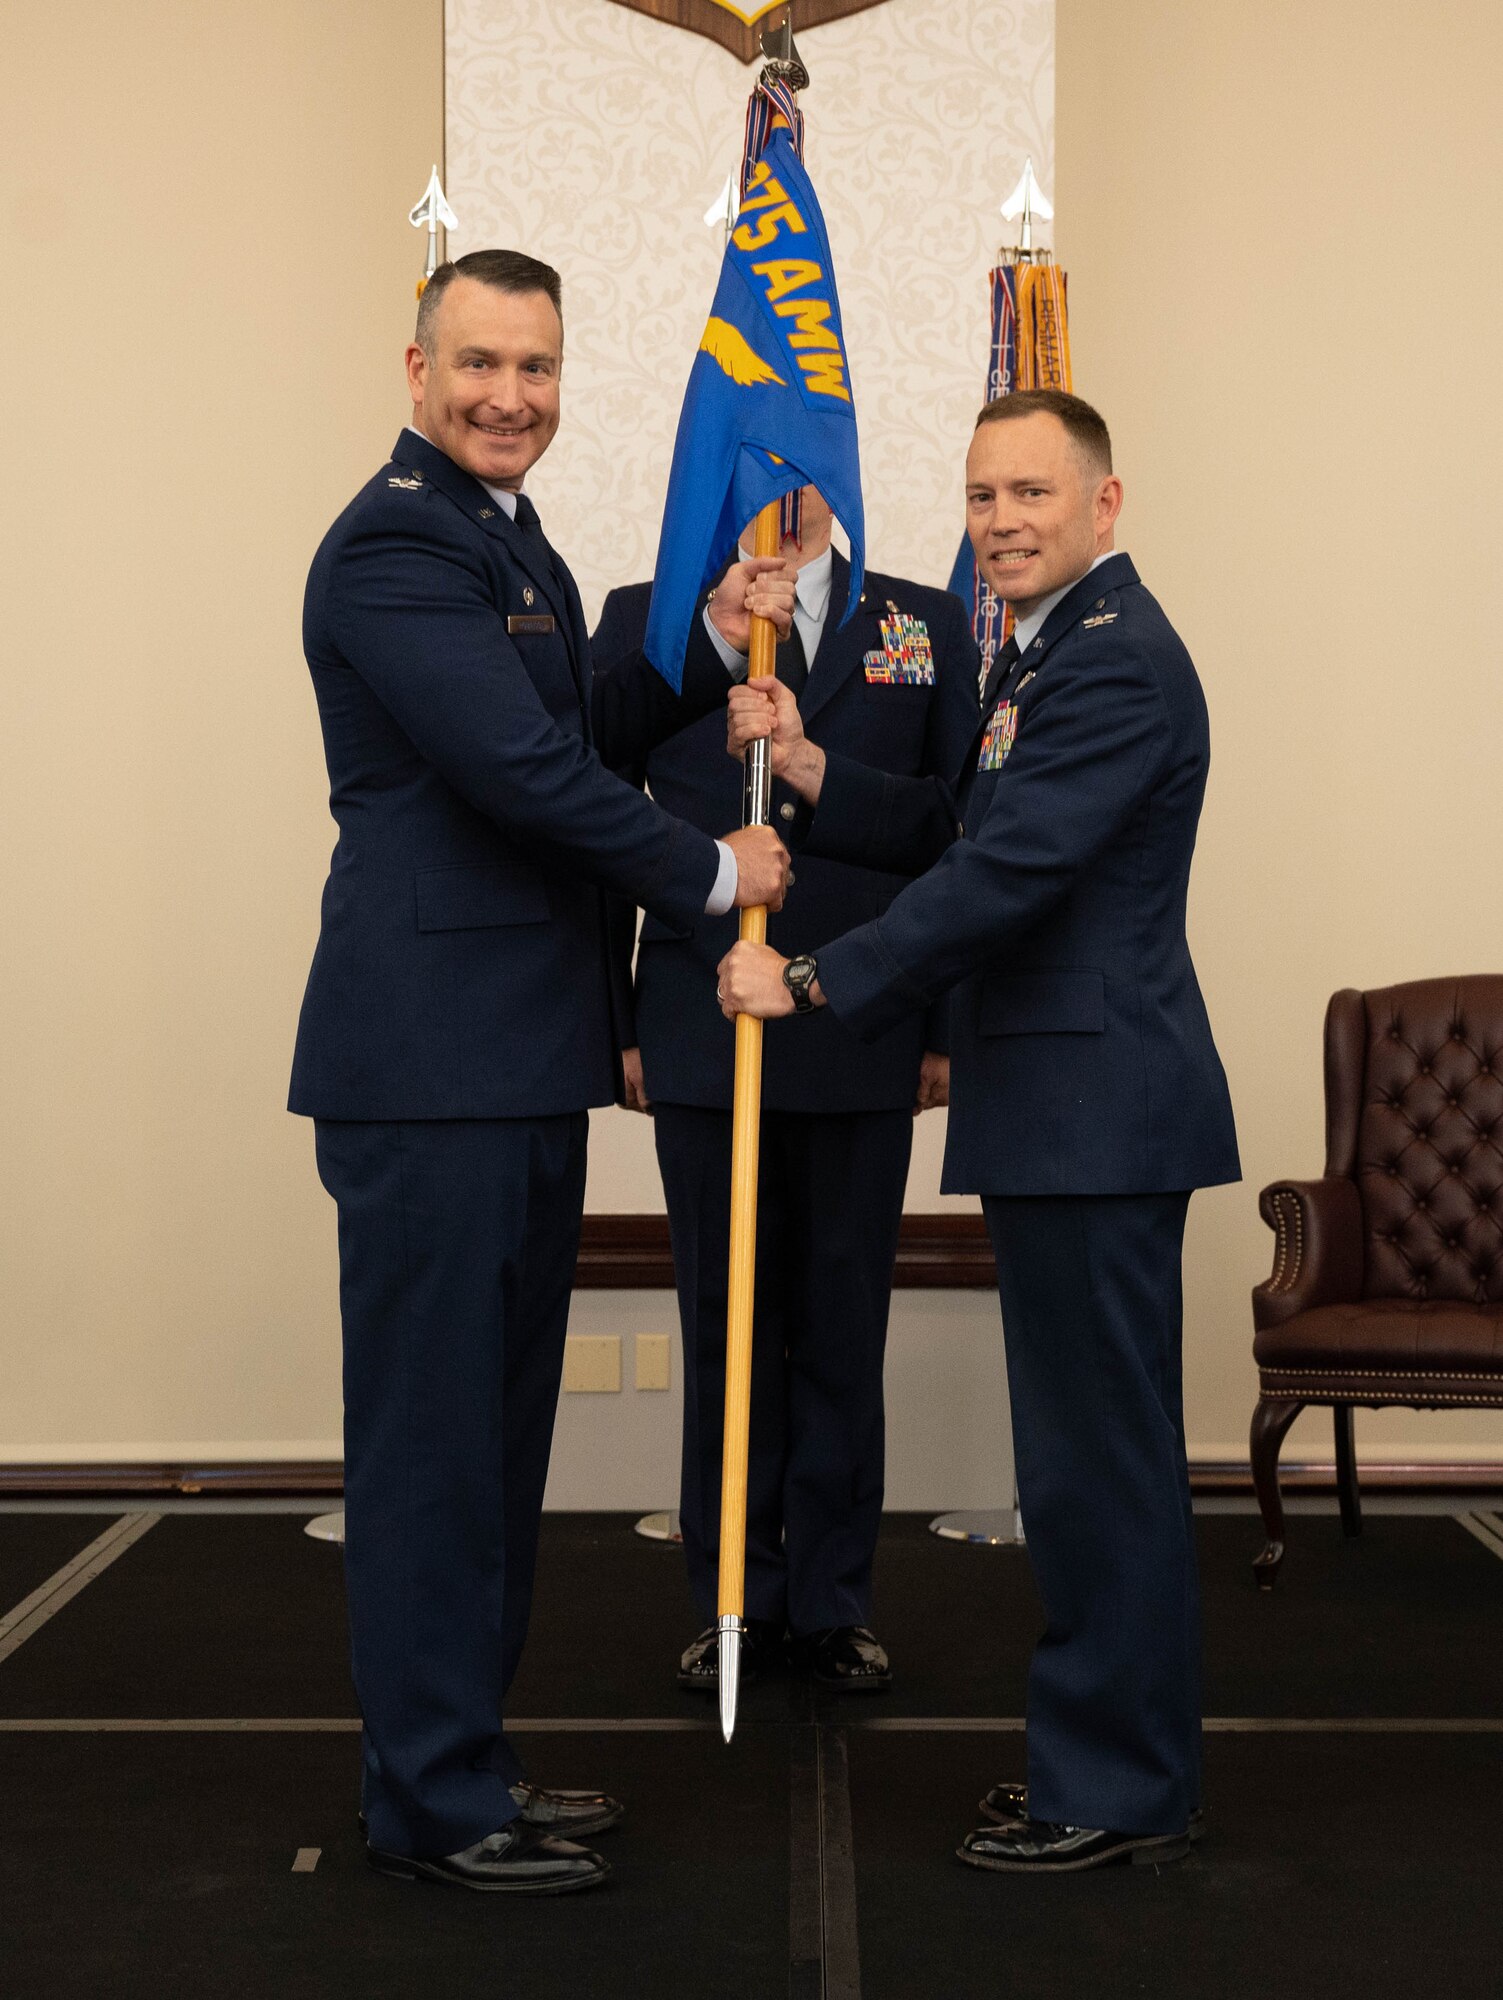 The passing of the guidon for the assumption of command.